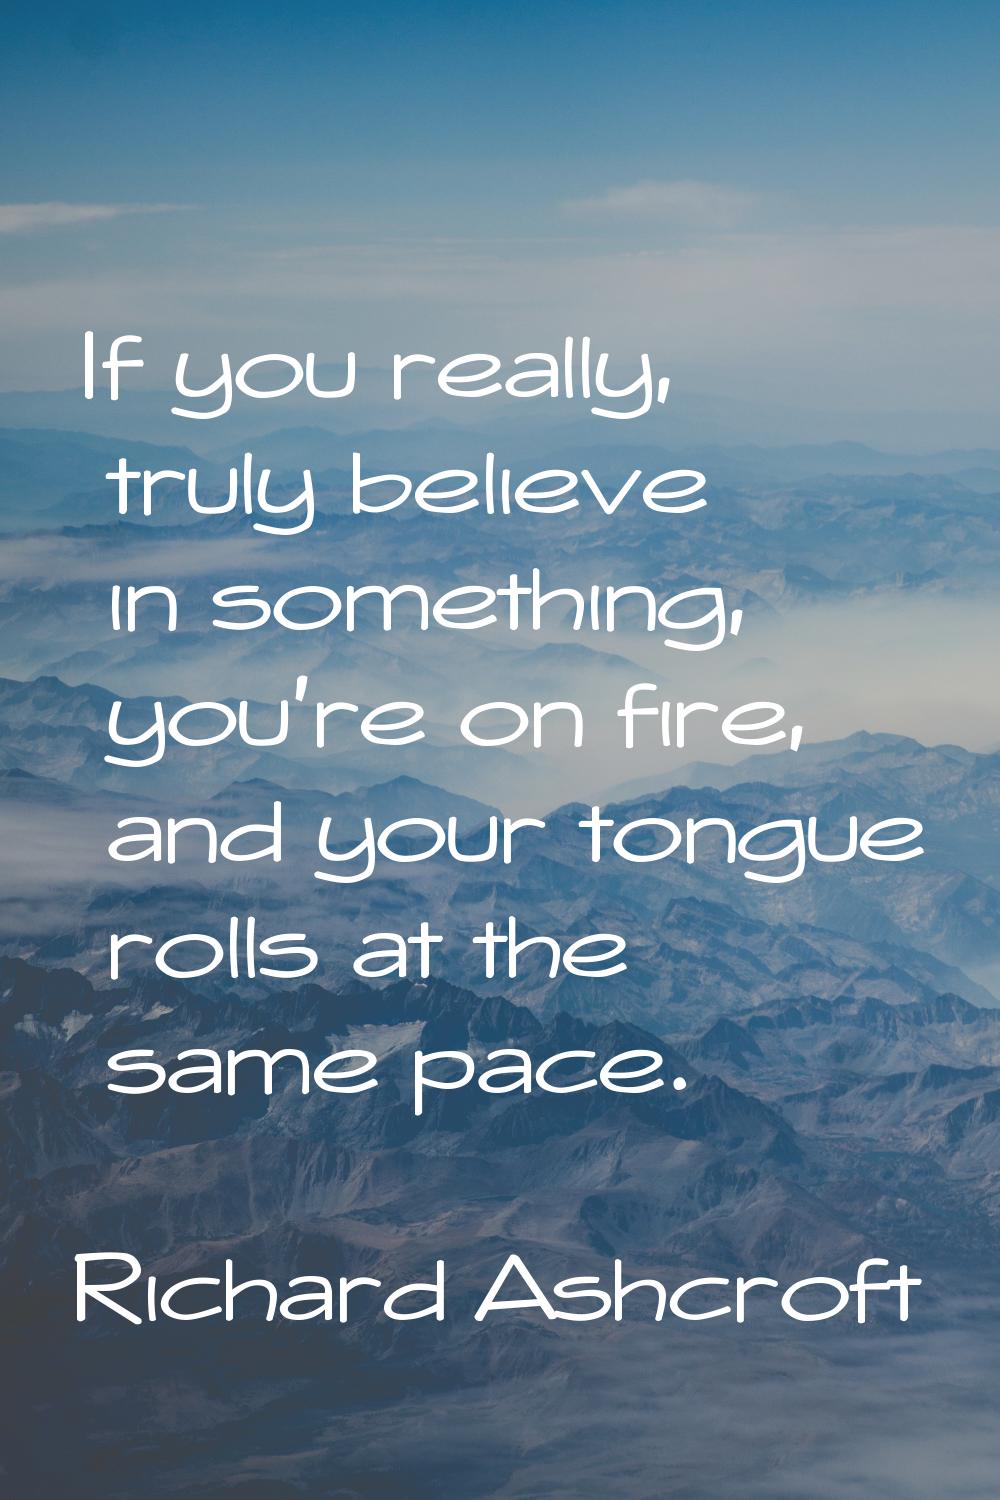 If you really, truly believe in something, you're on fire, and your tongue rolls at the same pace.